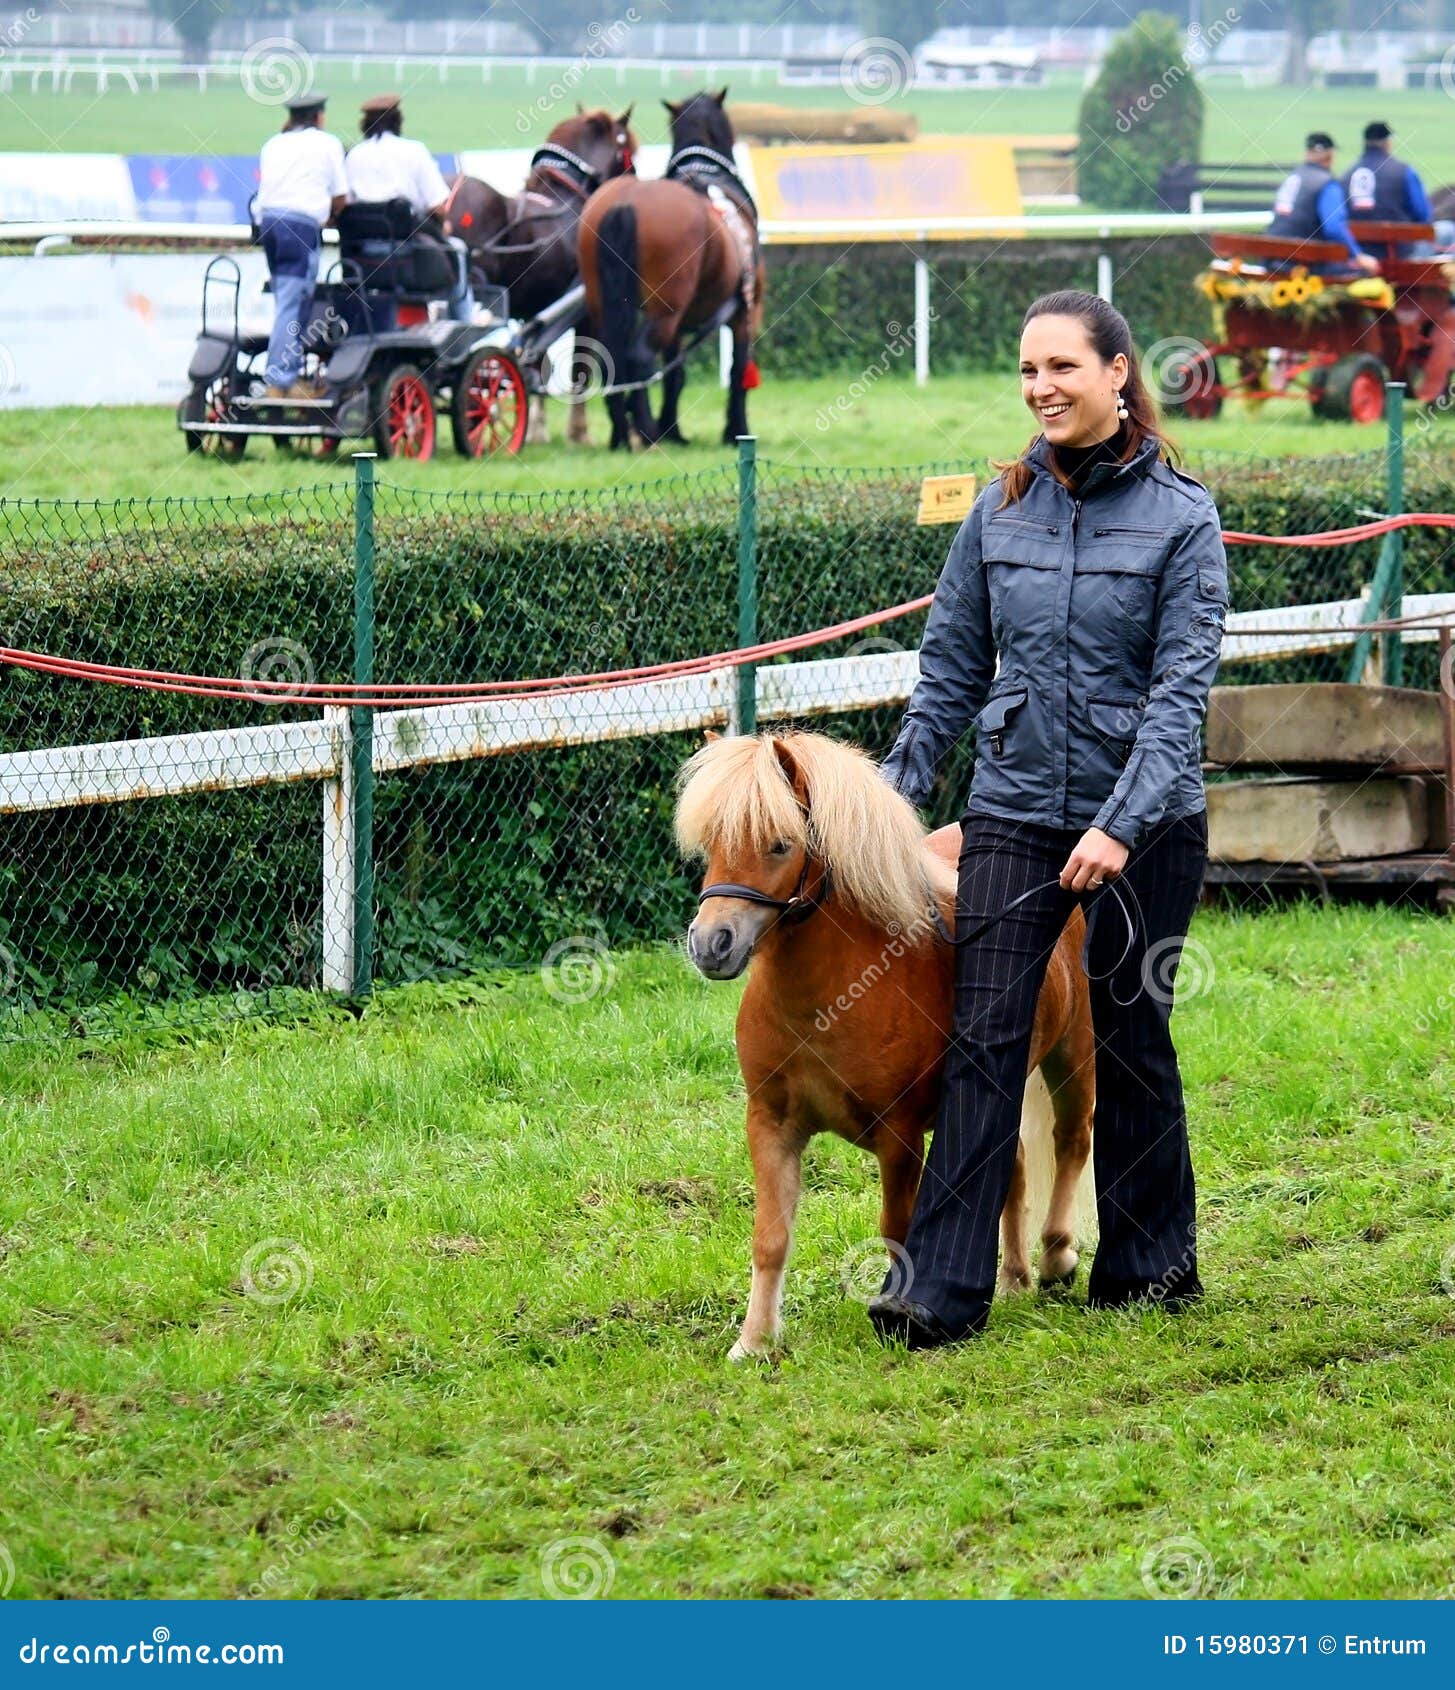 girl showing a mini pony